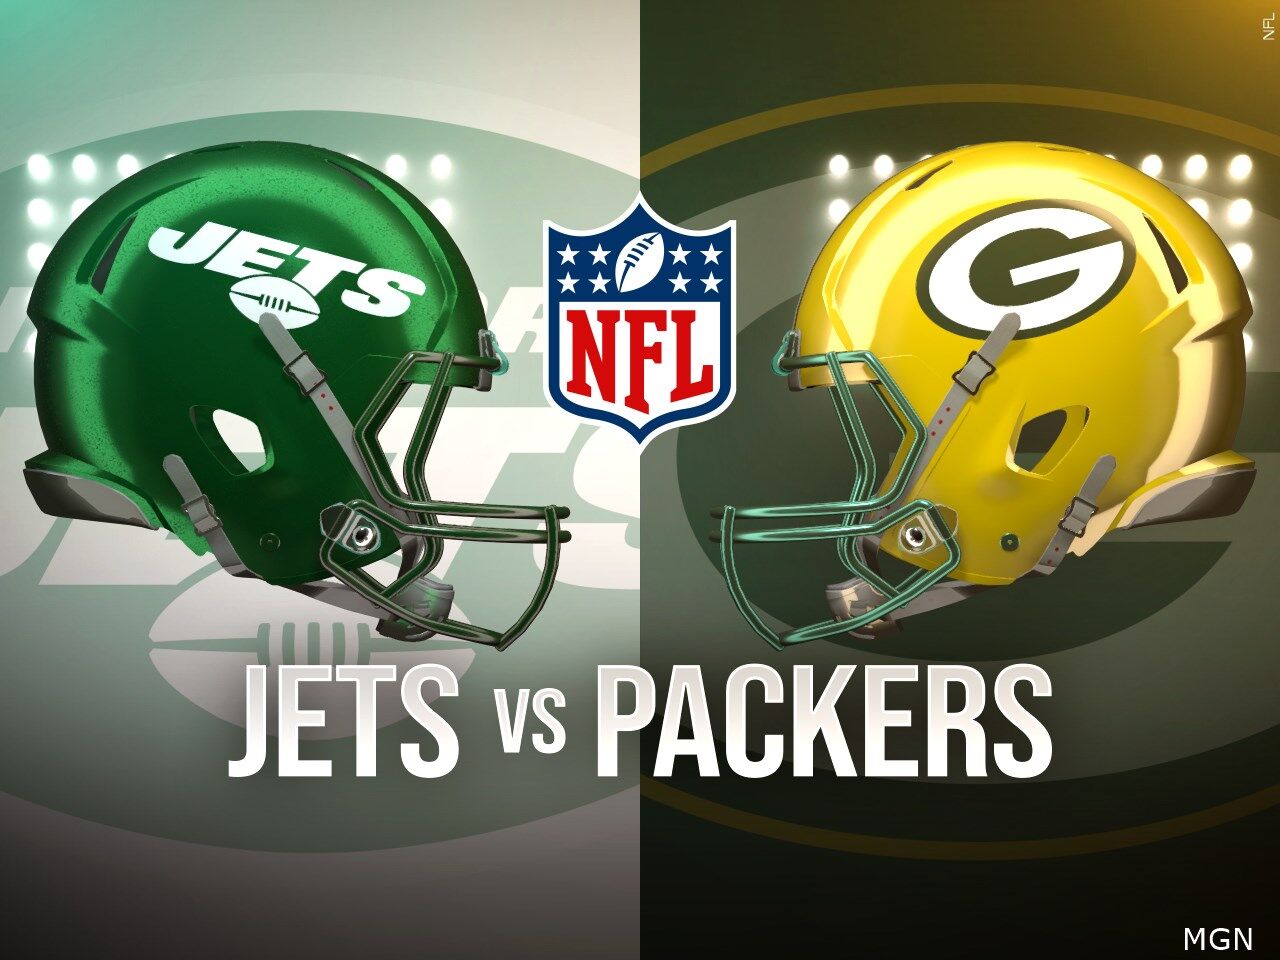 Jets stun the Packers 27-10 at Lambeau field as Packers drop to 3